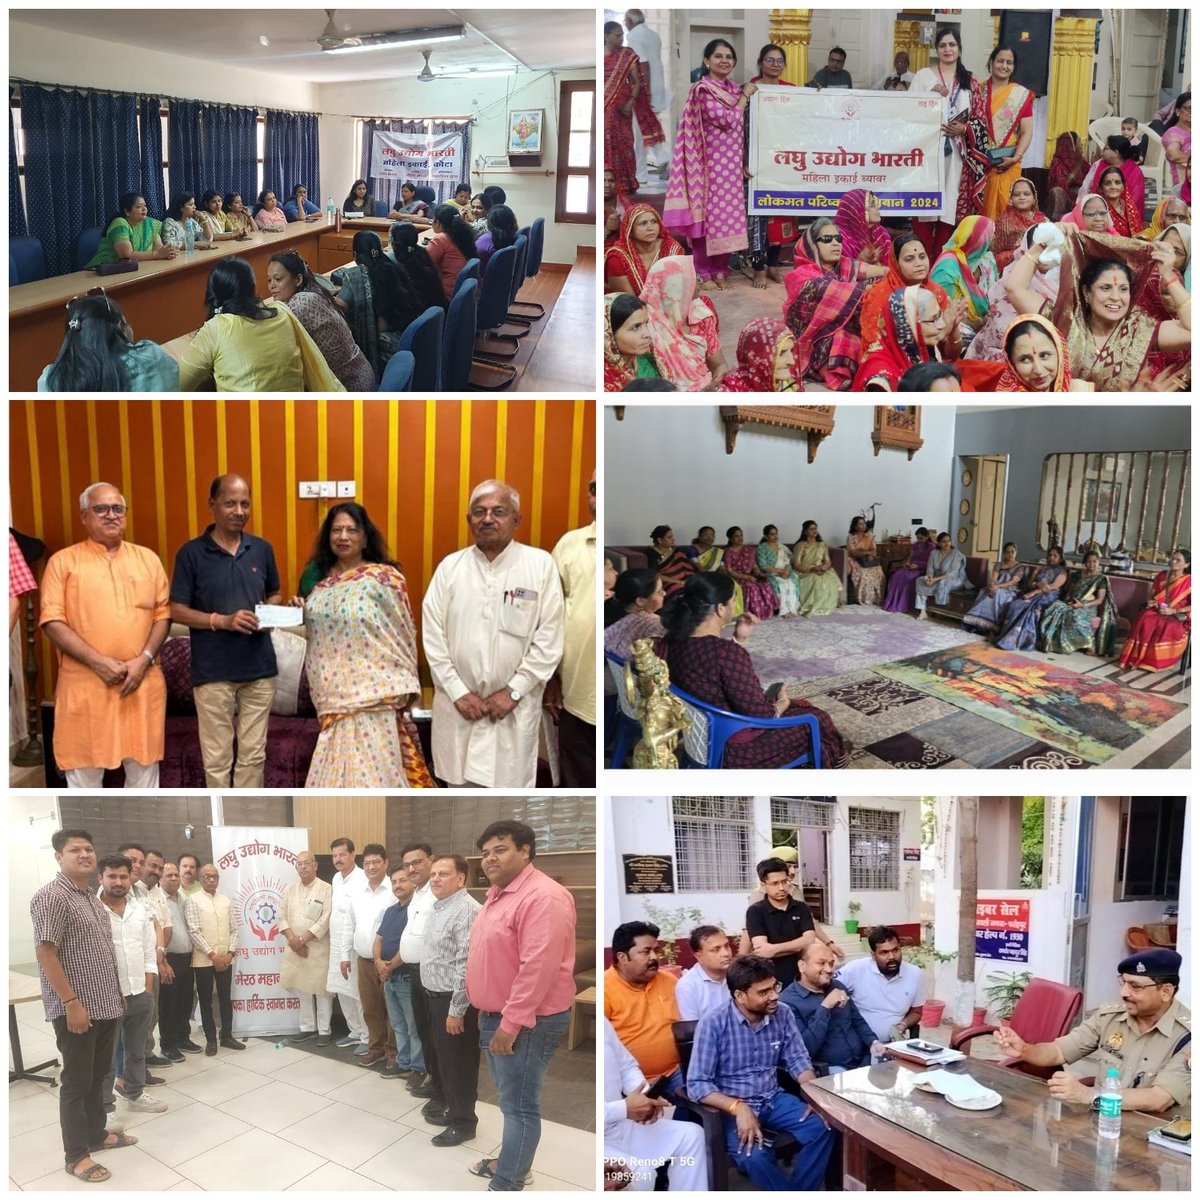 Check out the day's activities by Laghu Udyog Bharti (LUB): 

1. Empowering Women Entrepreneurs: Successful Monthly Meeting of LUB Kota #WomenEntrepreneurs #LUBKota #Empowerment

2. Empowering Women's Units in Small Industries: Lokmat Pariskar Campaign by LUB Mahila Ikai, Byawar